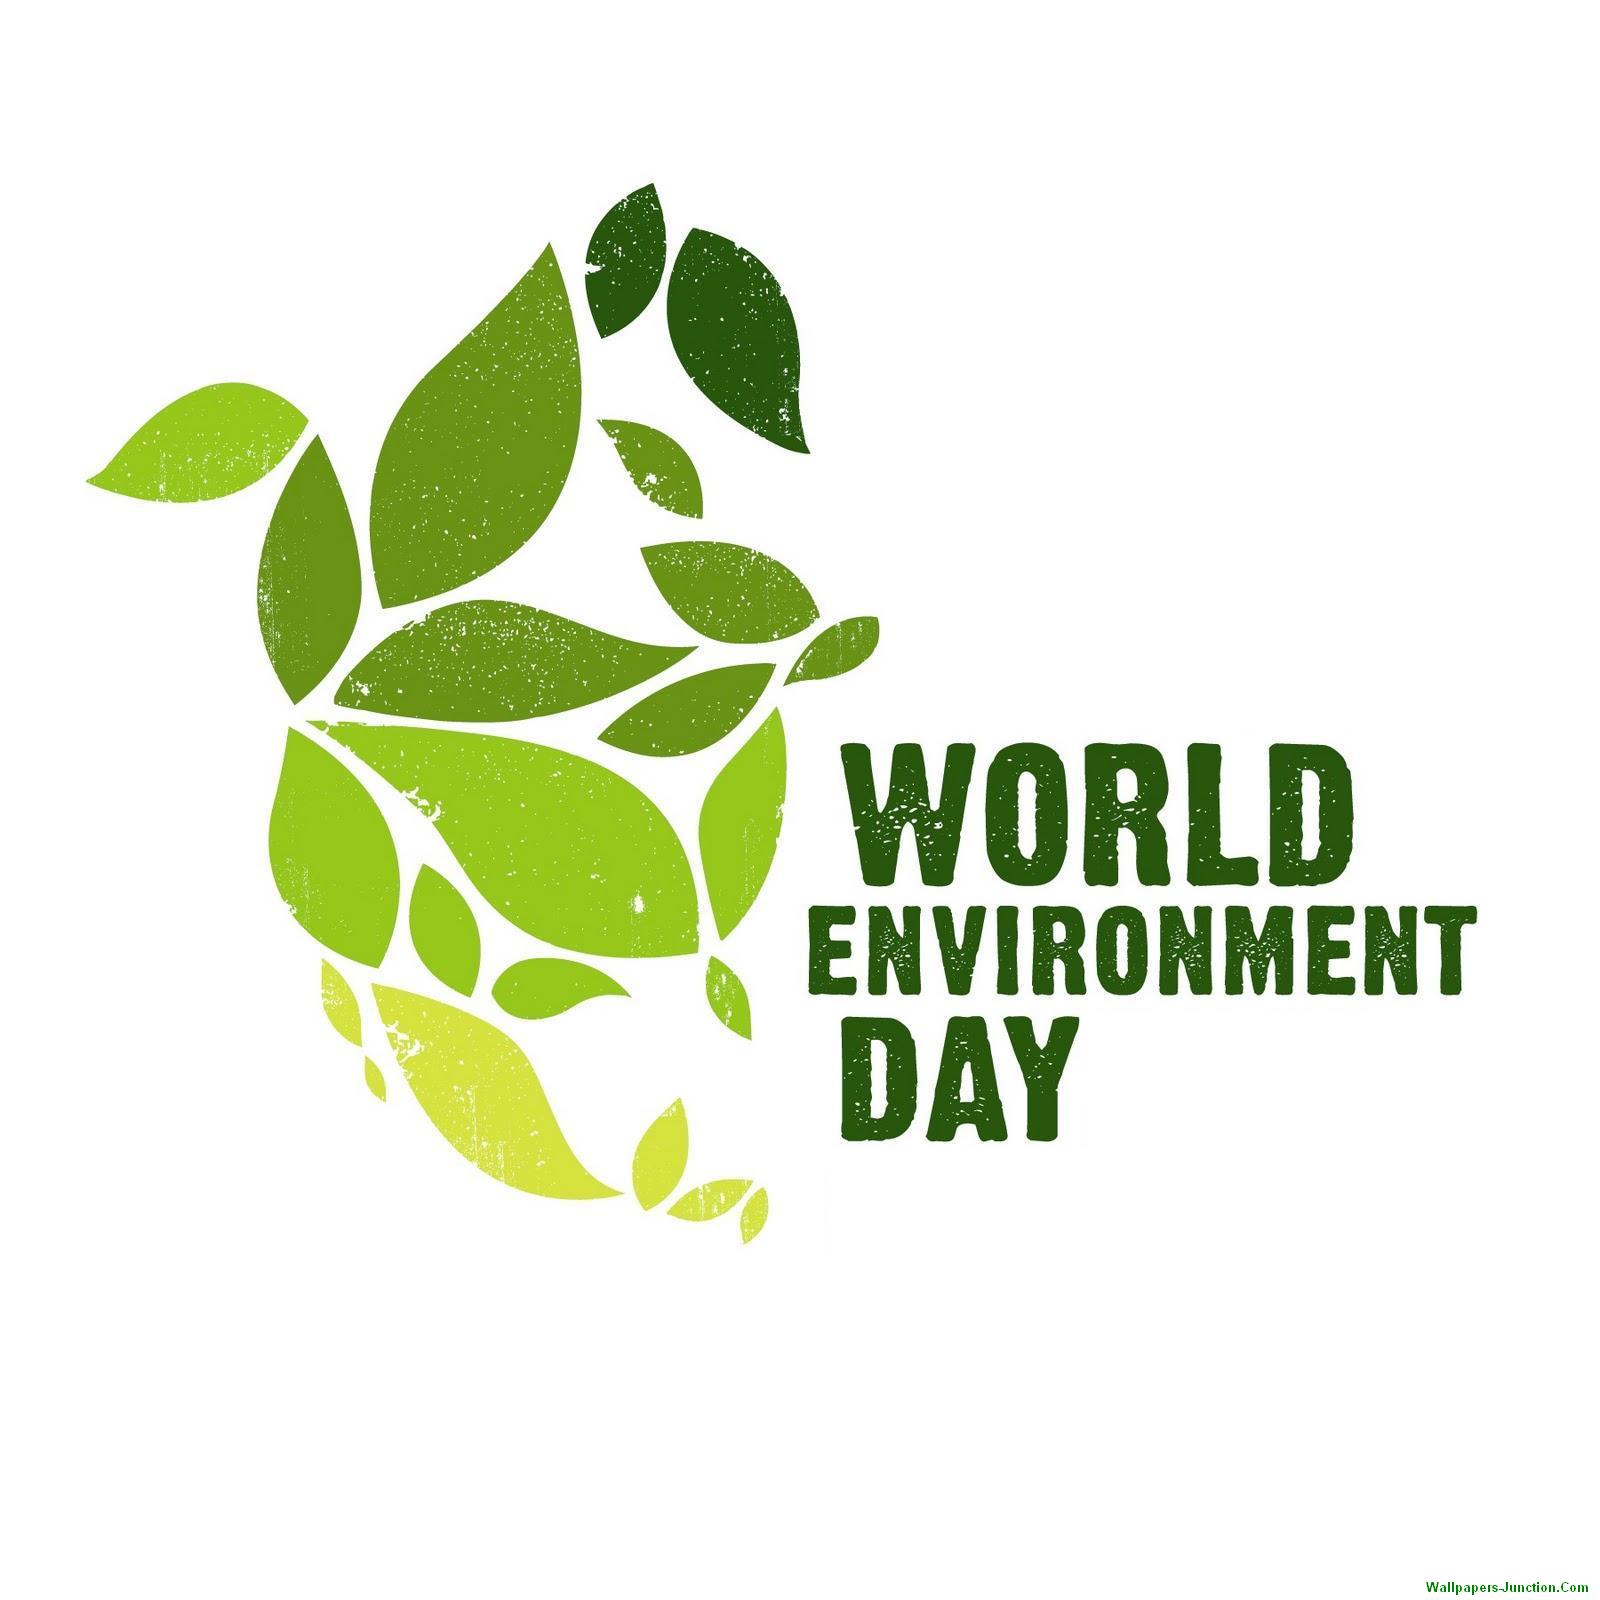 World Environment Day Images, Wallpapers & Photos for Whatsapp DP 2017